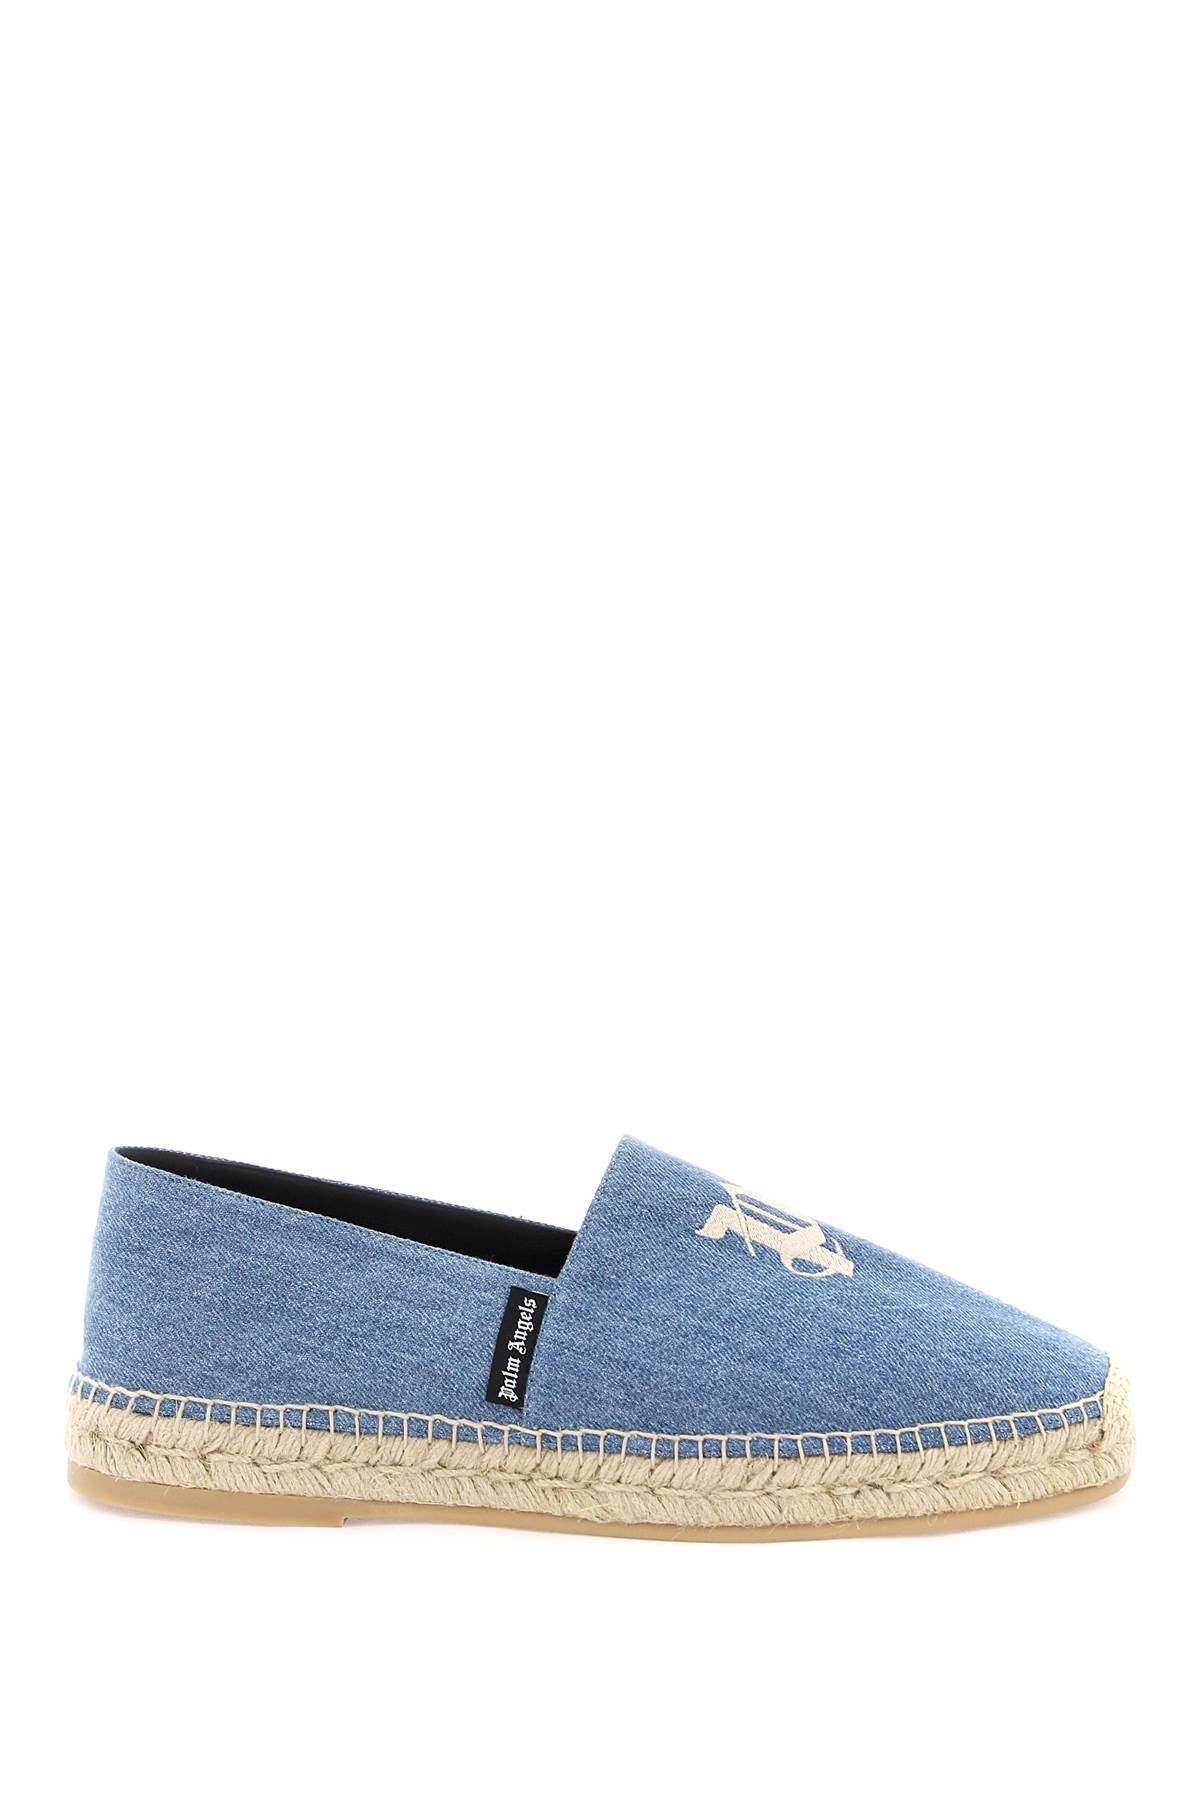 Palm angels denim espadrilles with embroidered logo-0